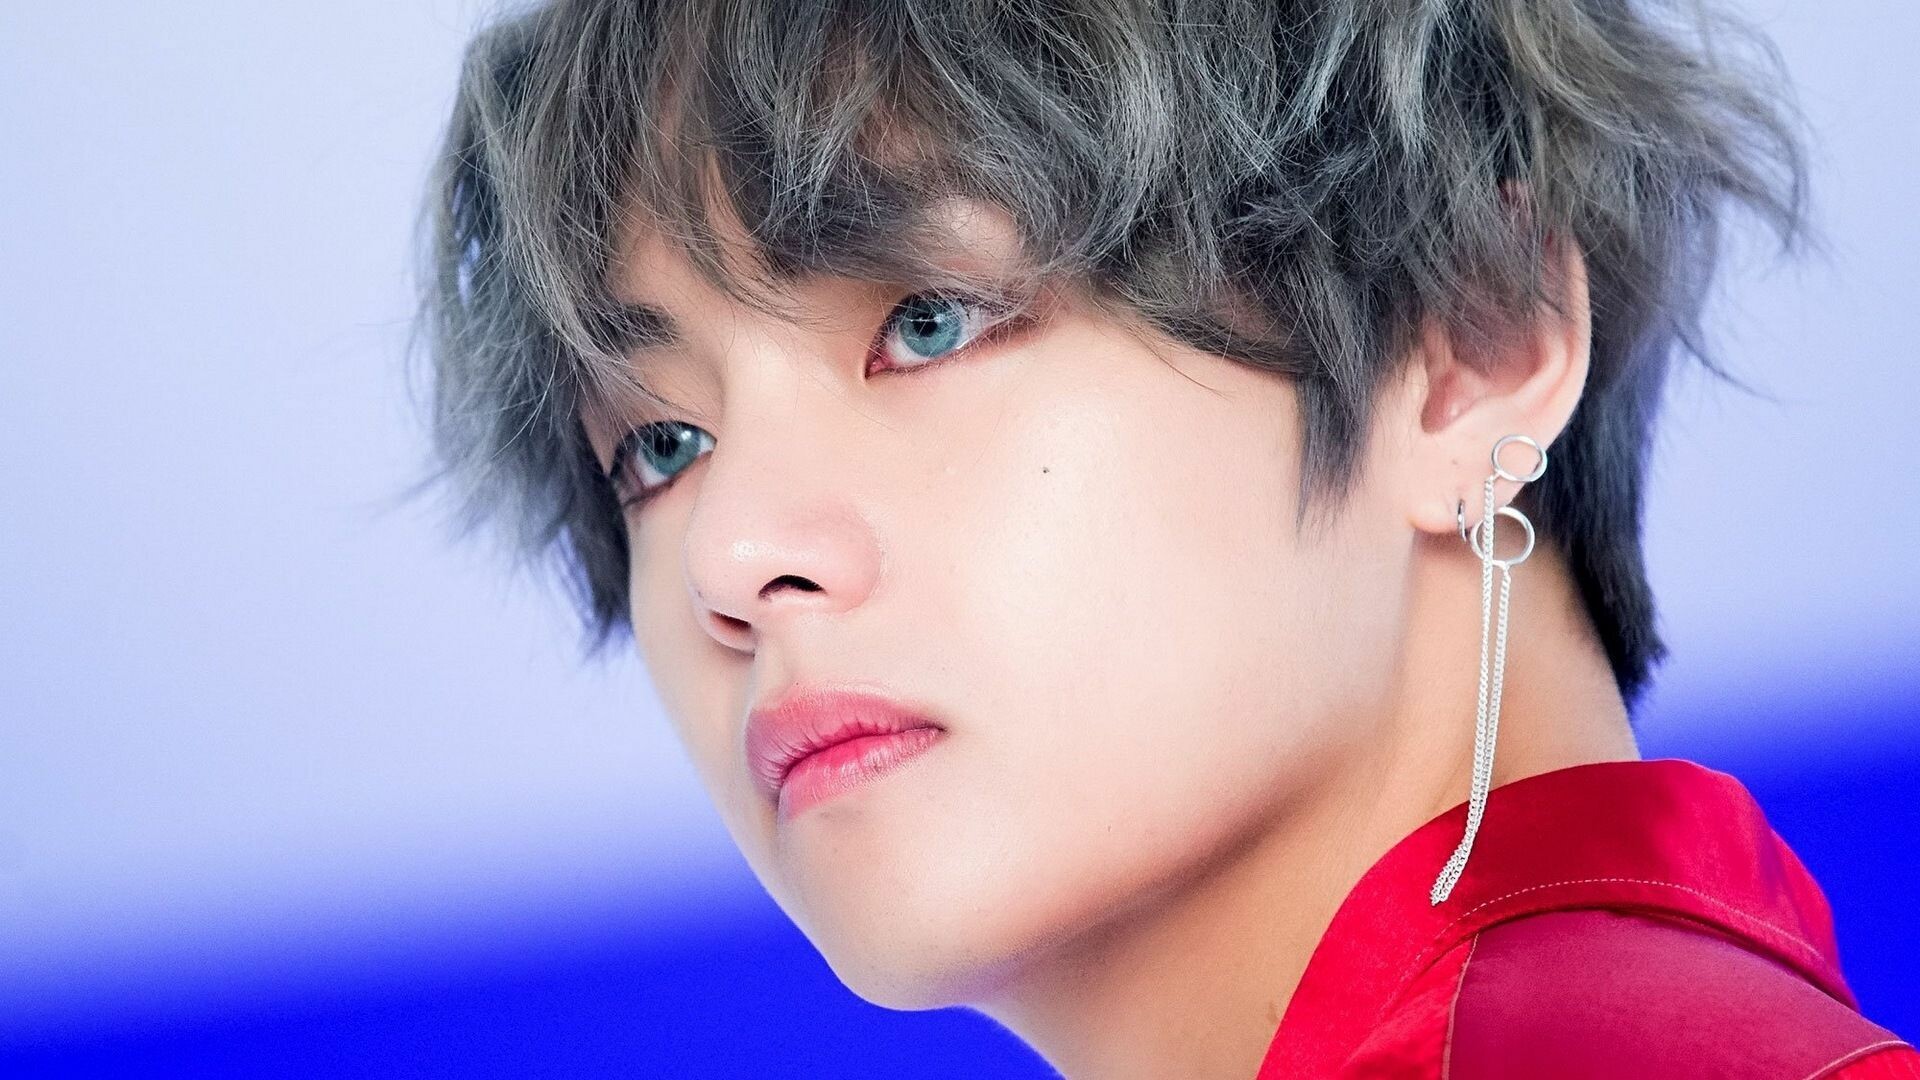 BTS: V, released his first independent song, the self-composed "Scenery", in 2019. 1920x1080 Full HD Wallpaper.